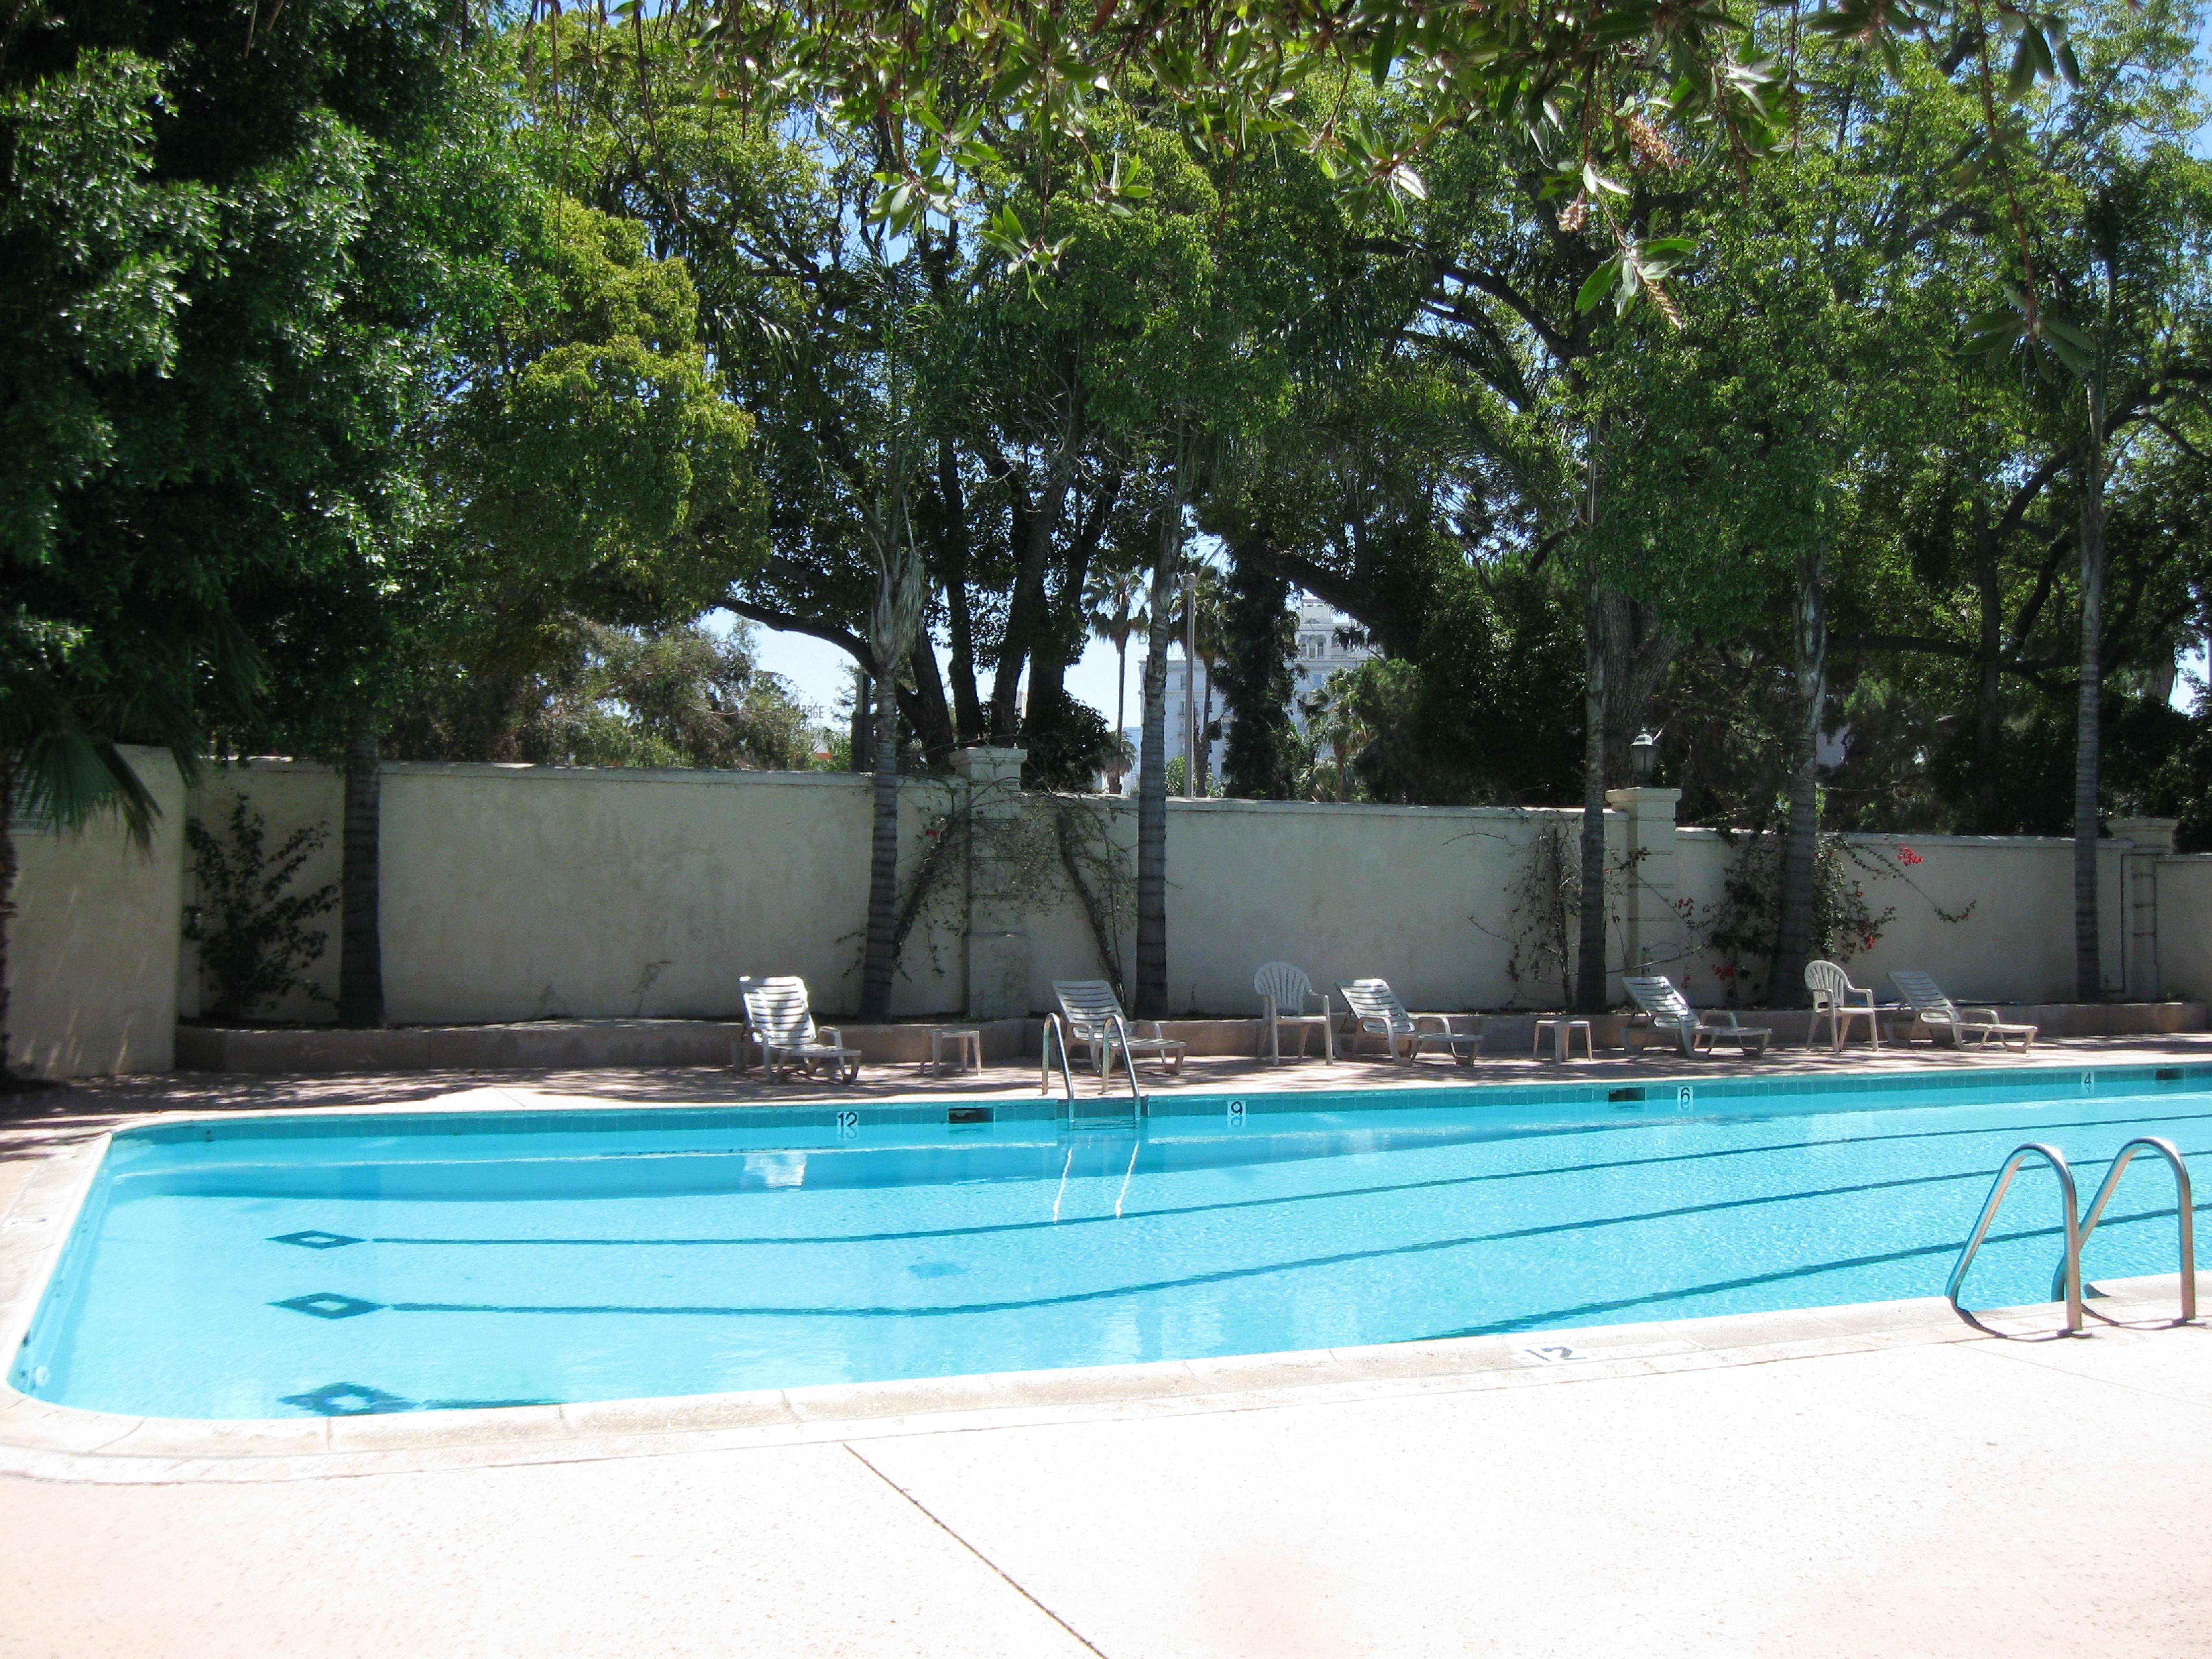 View of the pool at Sheraton Town House, with lounge chairs and a wall and tall trees